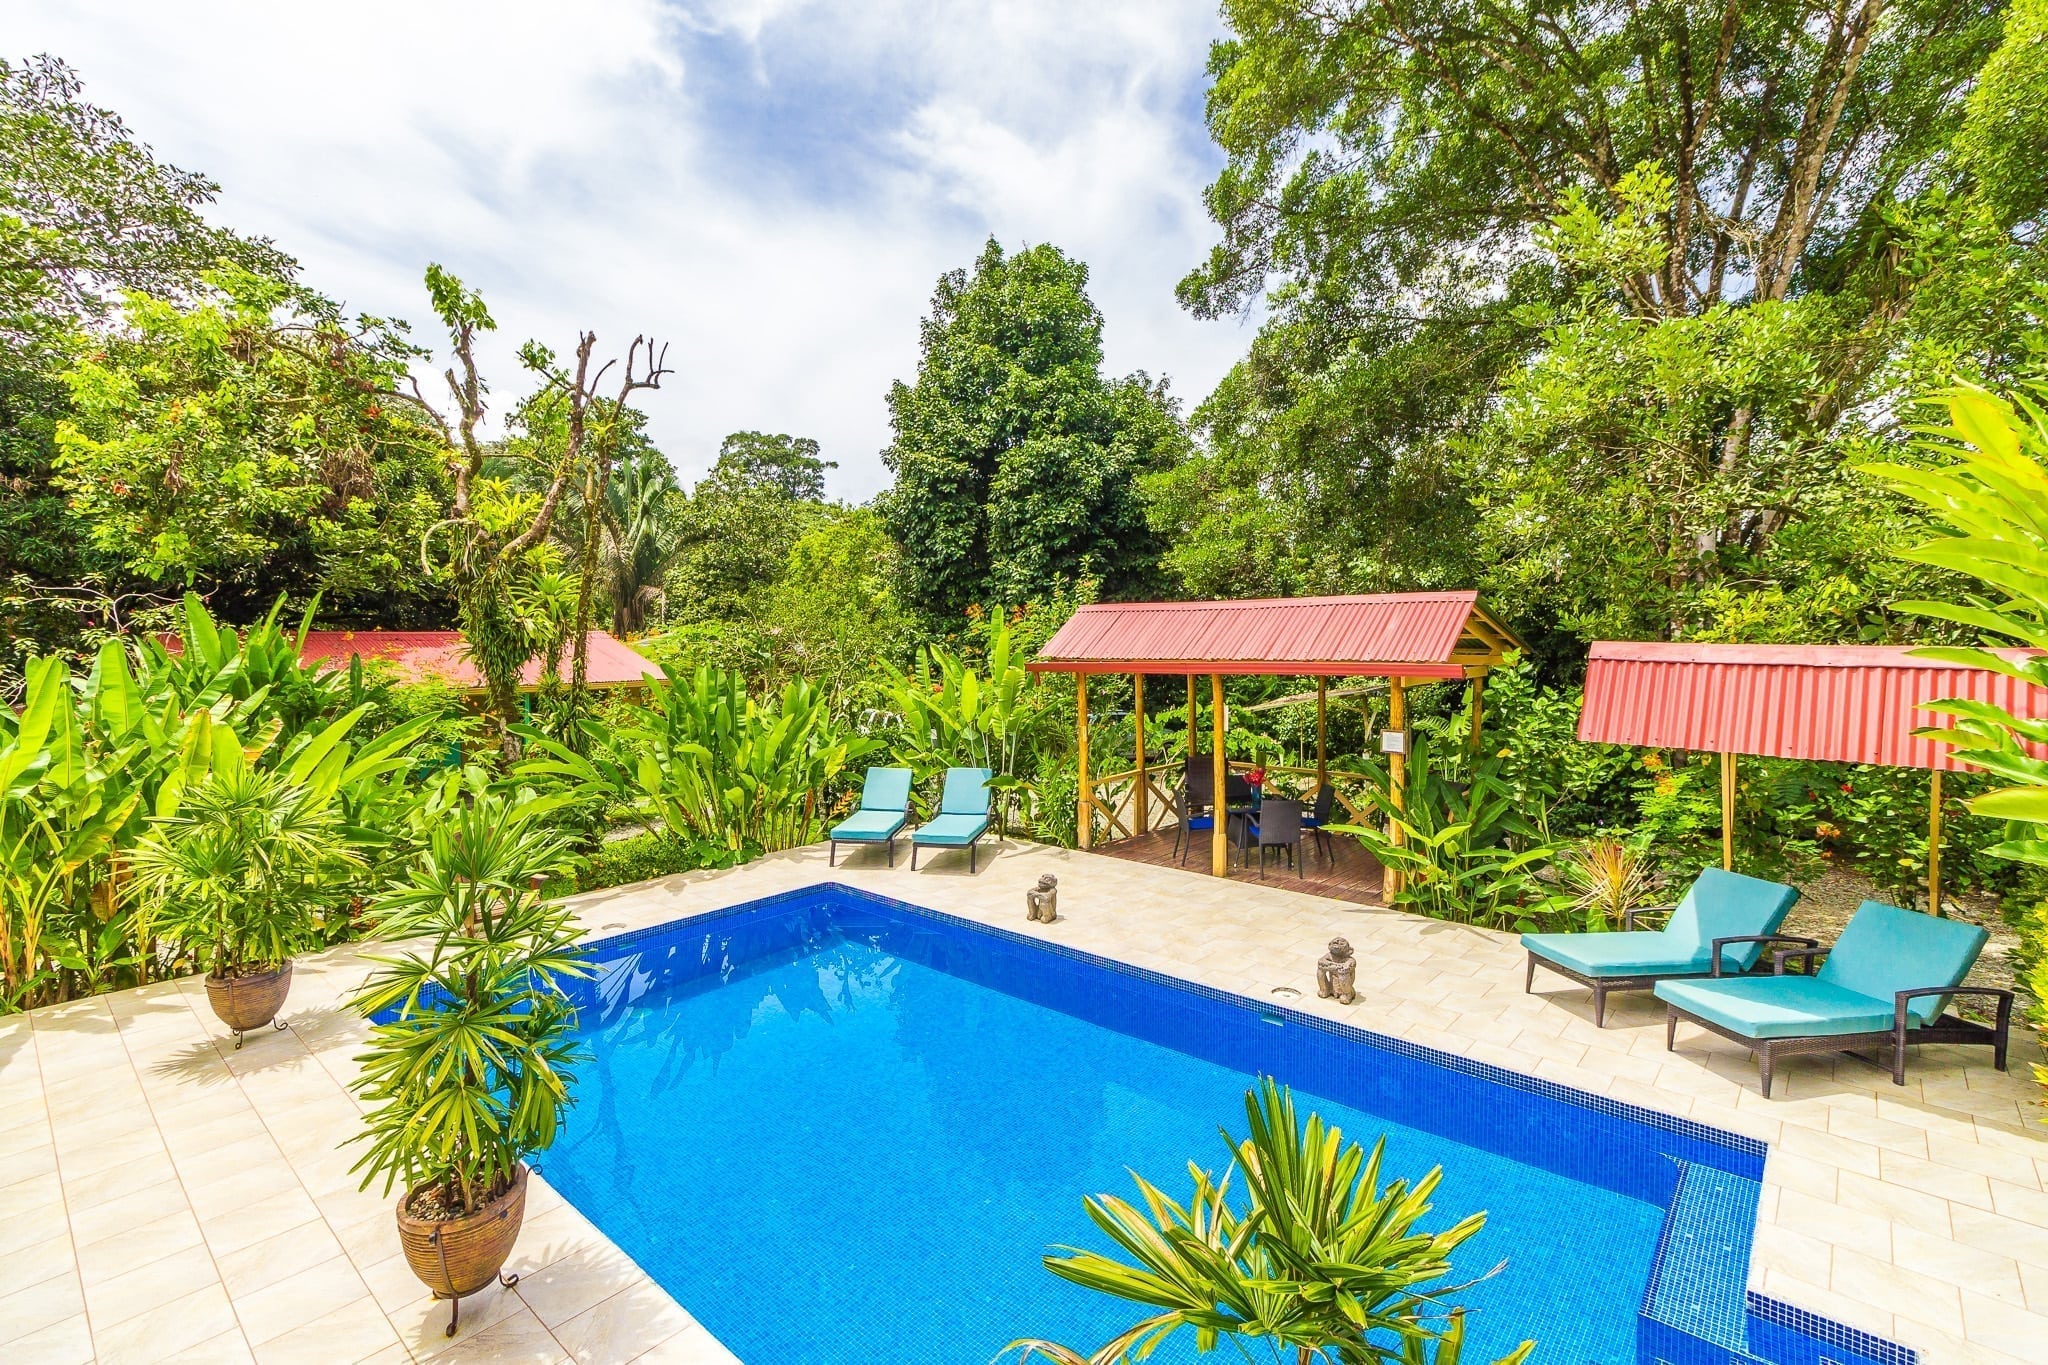 2.2 ACRES - Turn Key Boutique Hotel In The Heart Of Ojochal With Pool And Owner's Home!!!